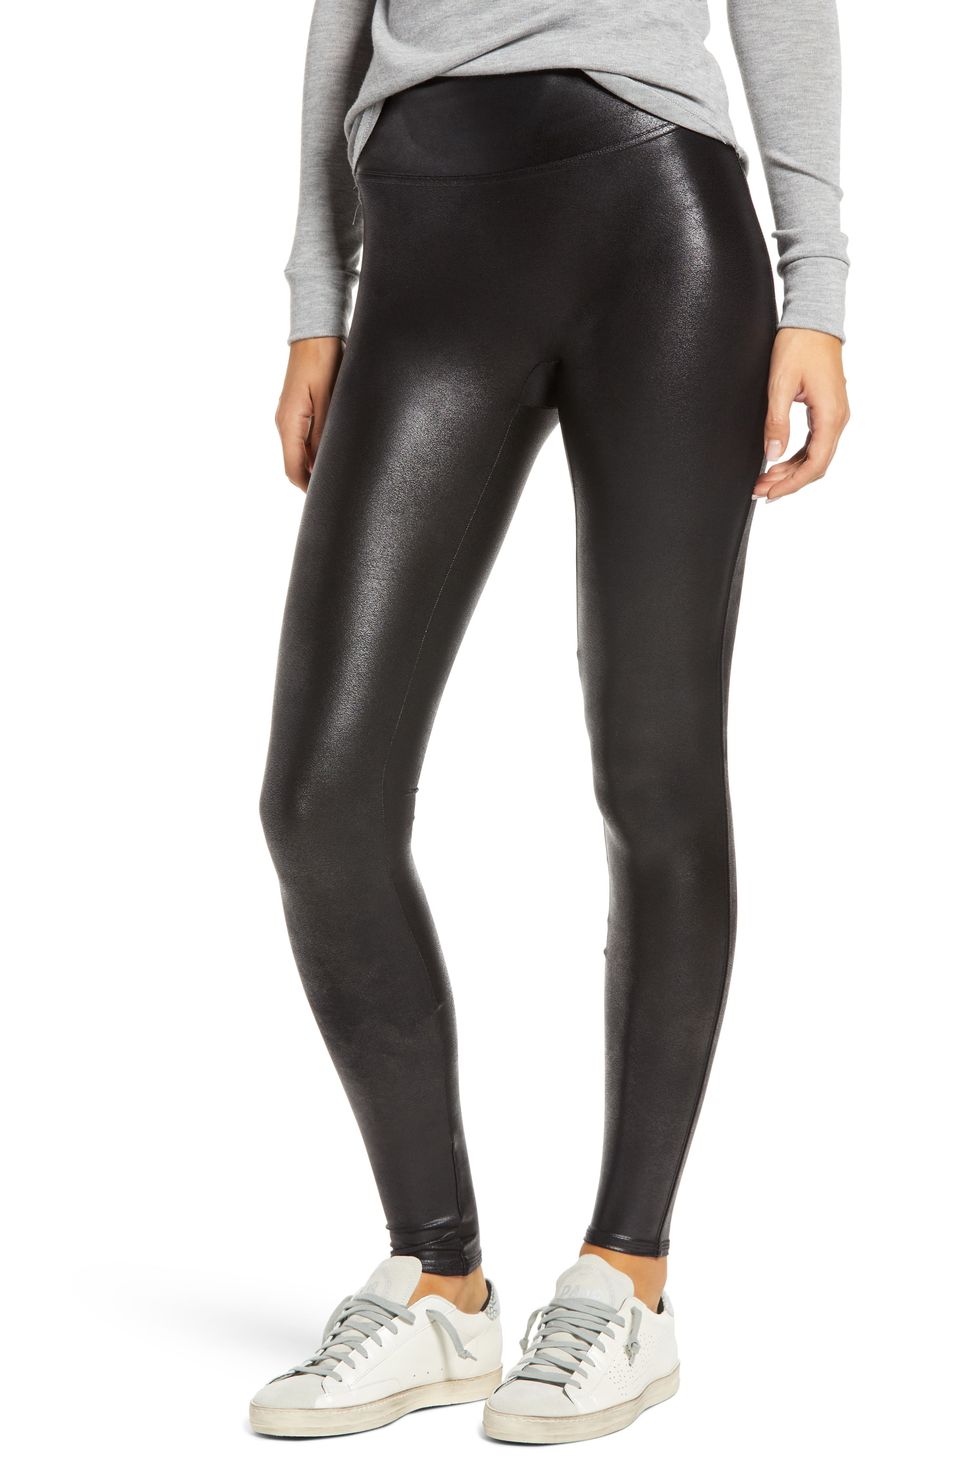 Gold Shiny Faux Leather Wet Look with Side Zip - Leggings 